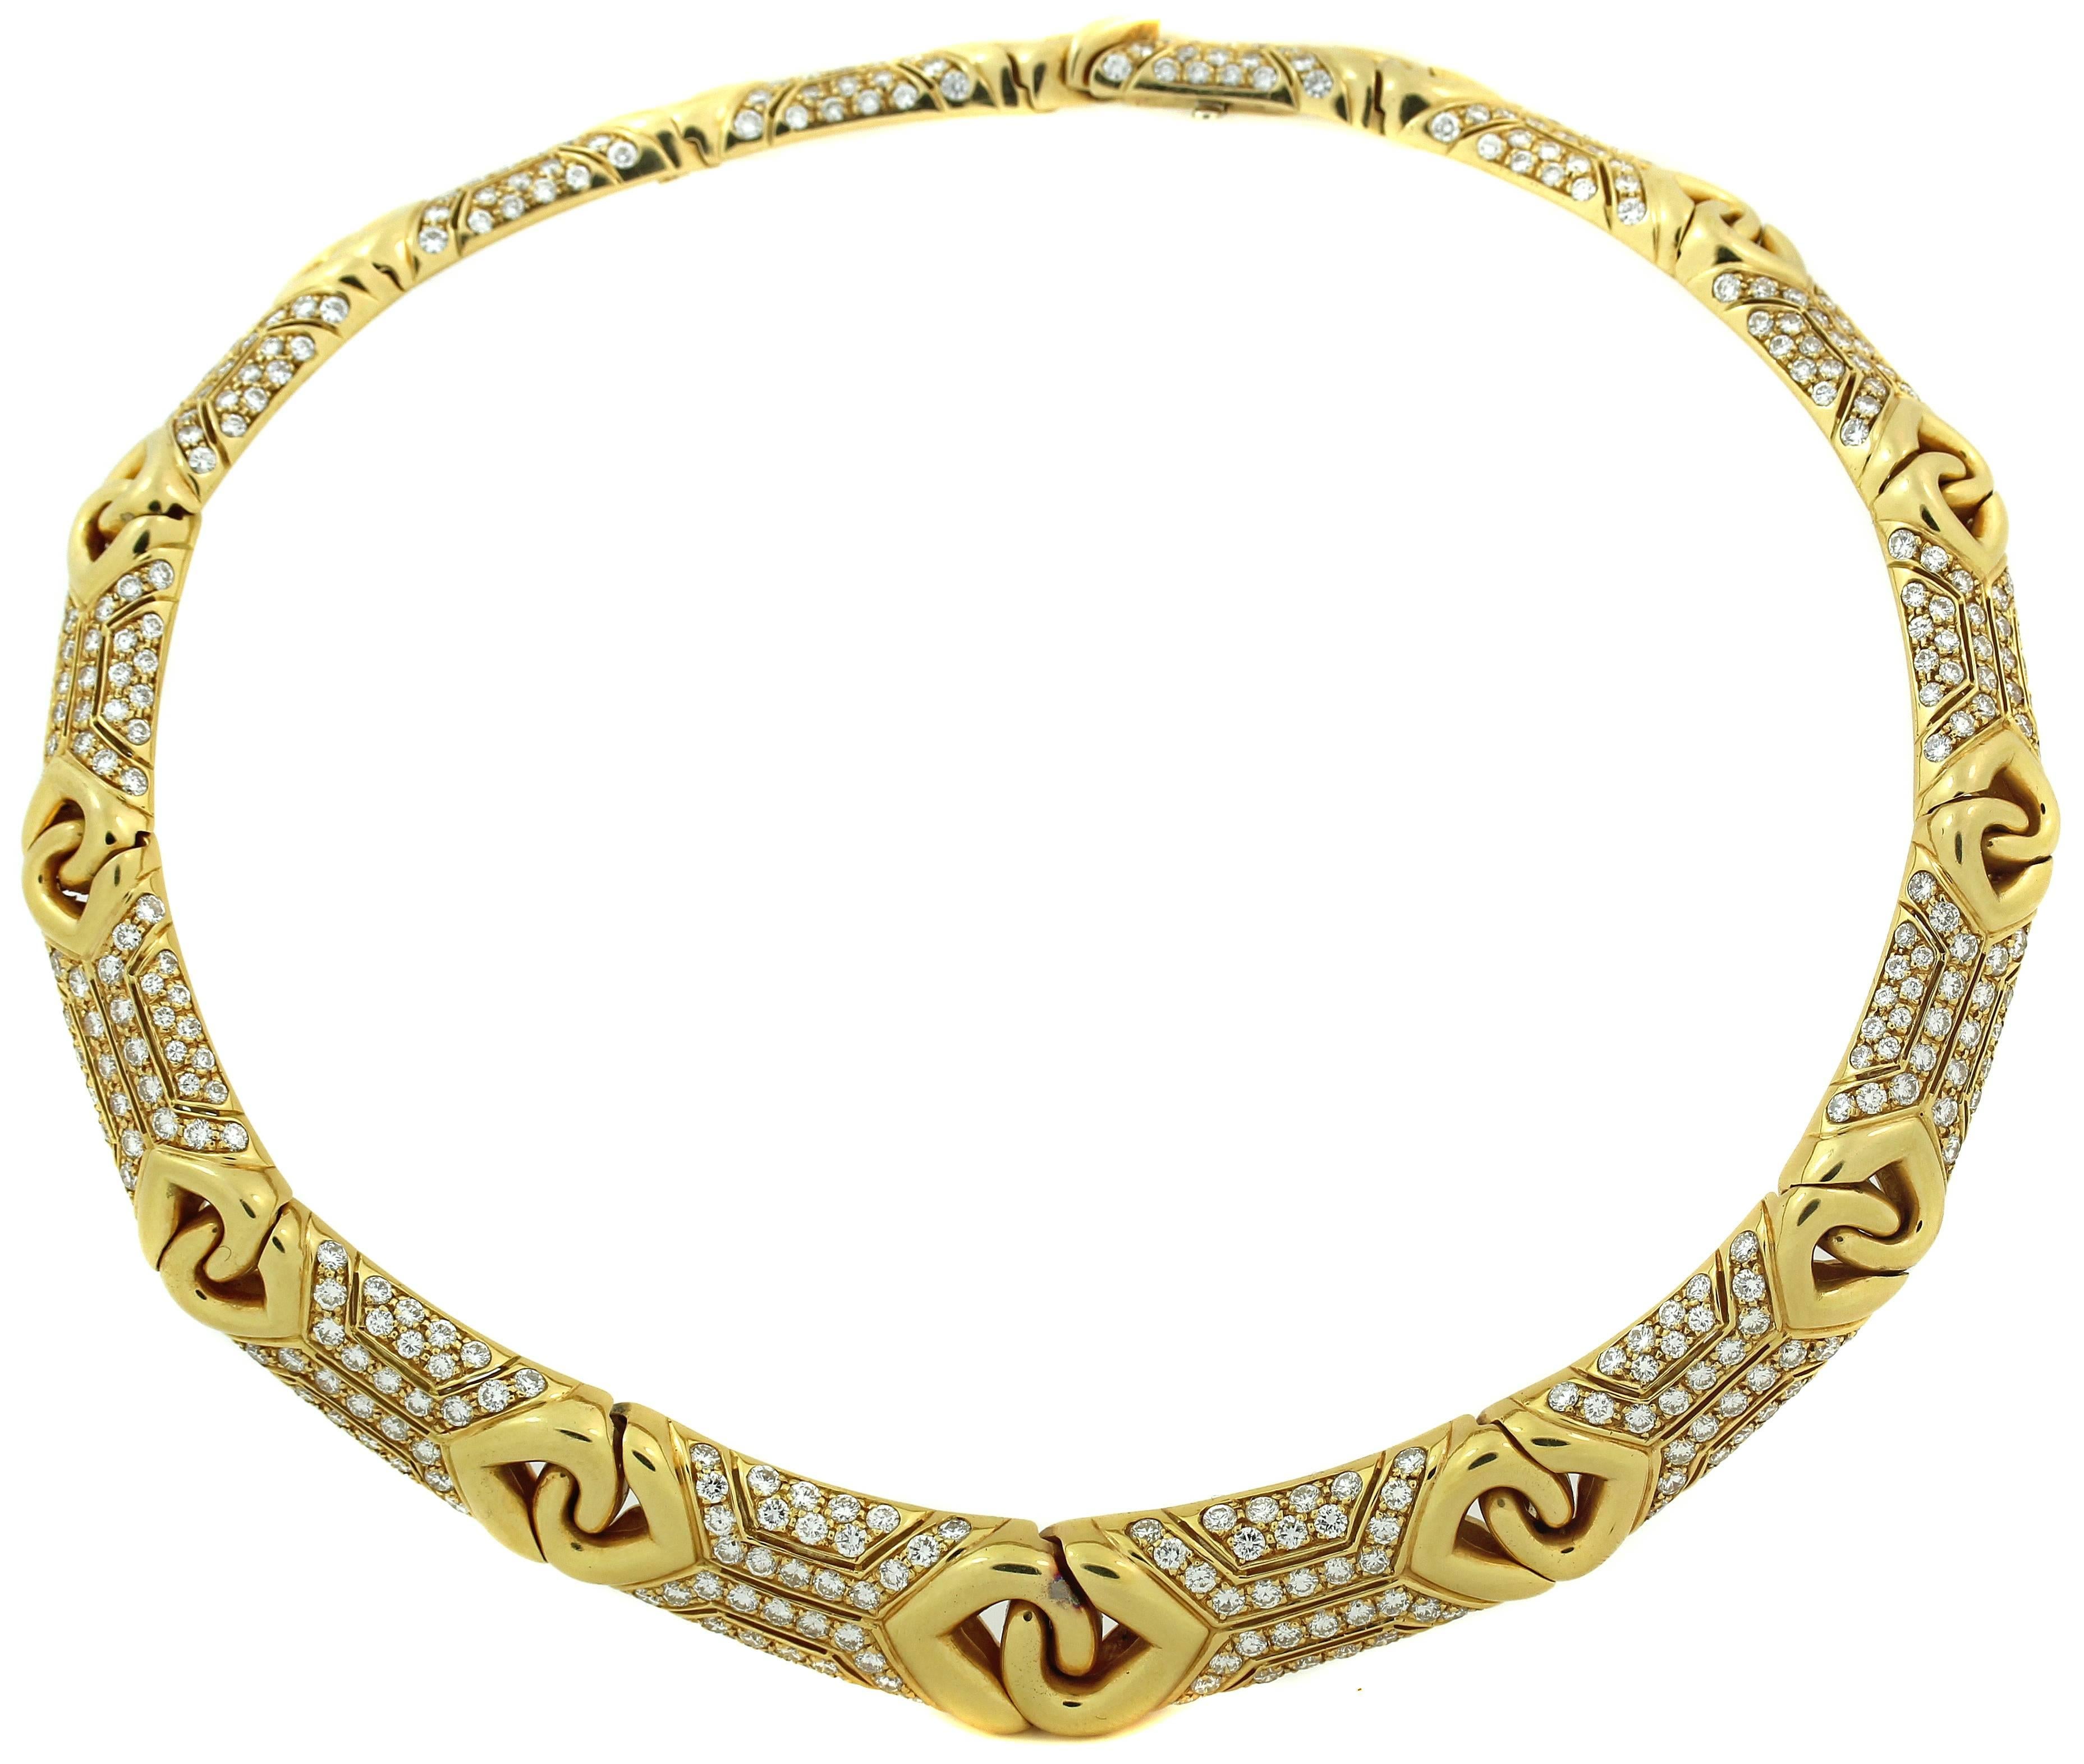 Gorgeous 18K Gold and Diamond Necklace by Bulgari

Necklace has apprx. 18 carats of F-G Color, VS Clarity Diamonds. Diamonds are set around polished gold links.

16 inches in length. Collar necklace, has the look and feel of a choker.

0.6 inch